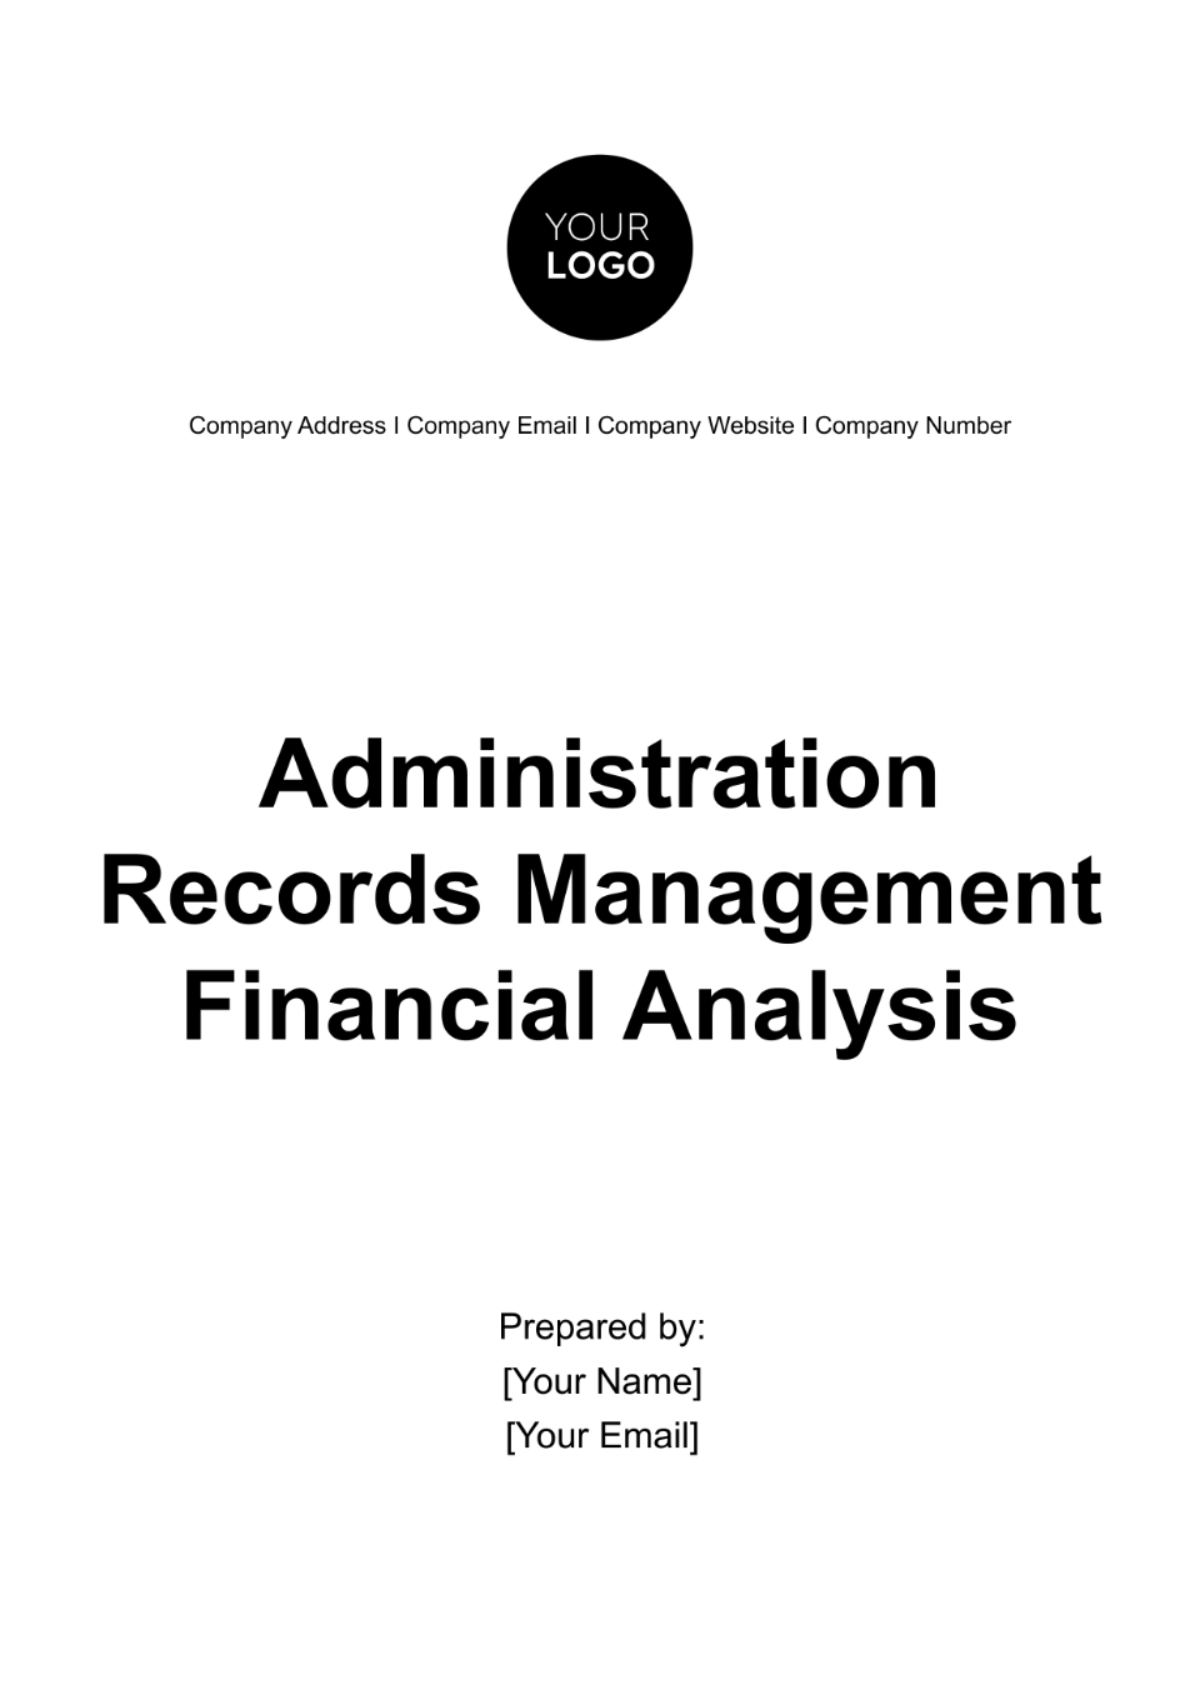 Free Administration Records Management Financial Analysis Template